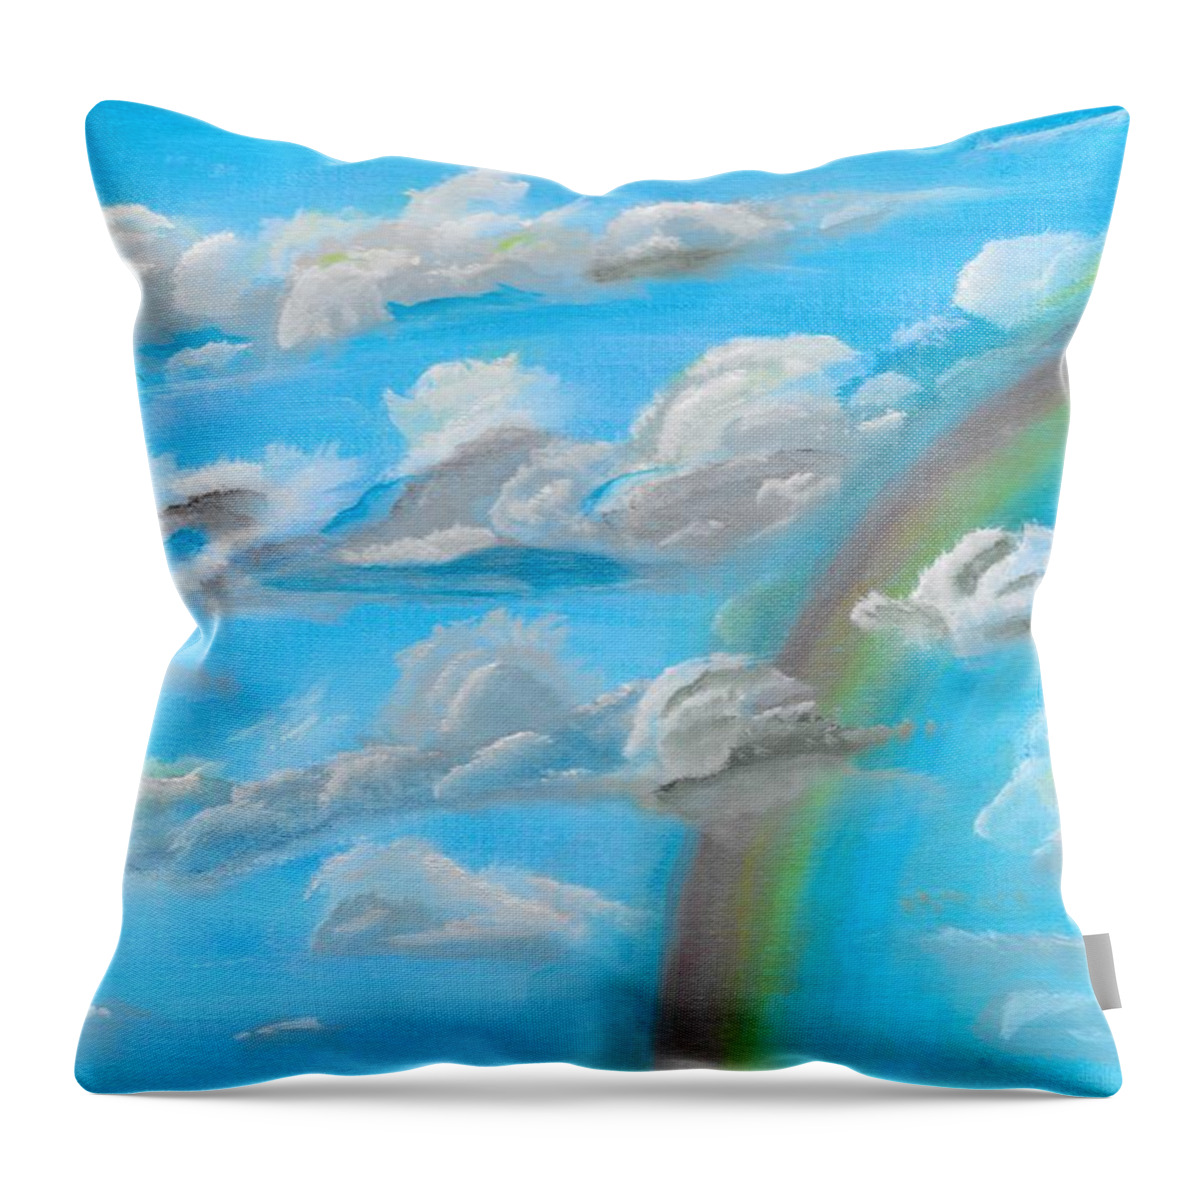 Clouds Throw Pillow featuring the painting Cloud Busting by David Bigelow